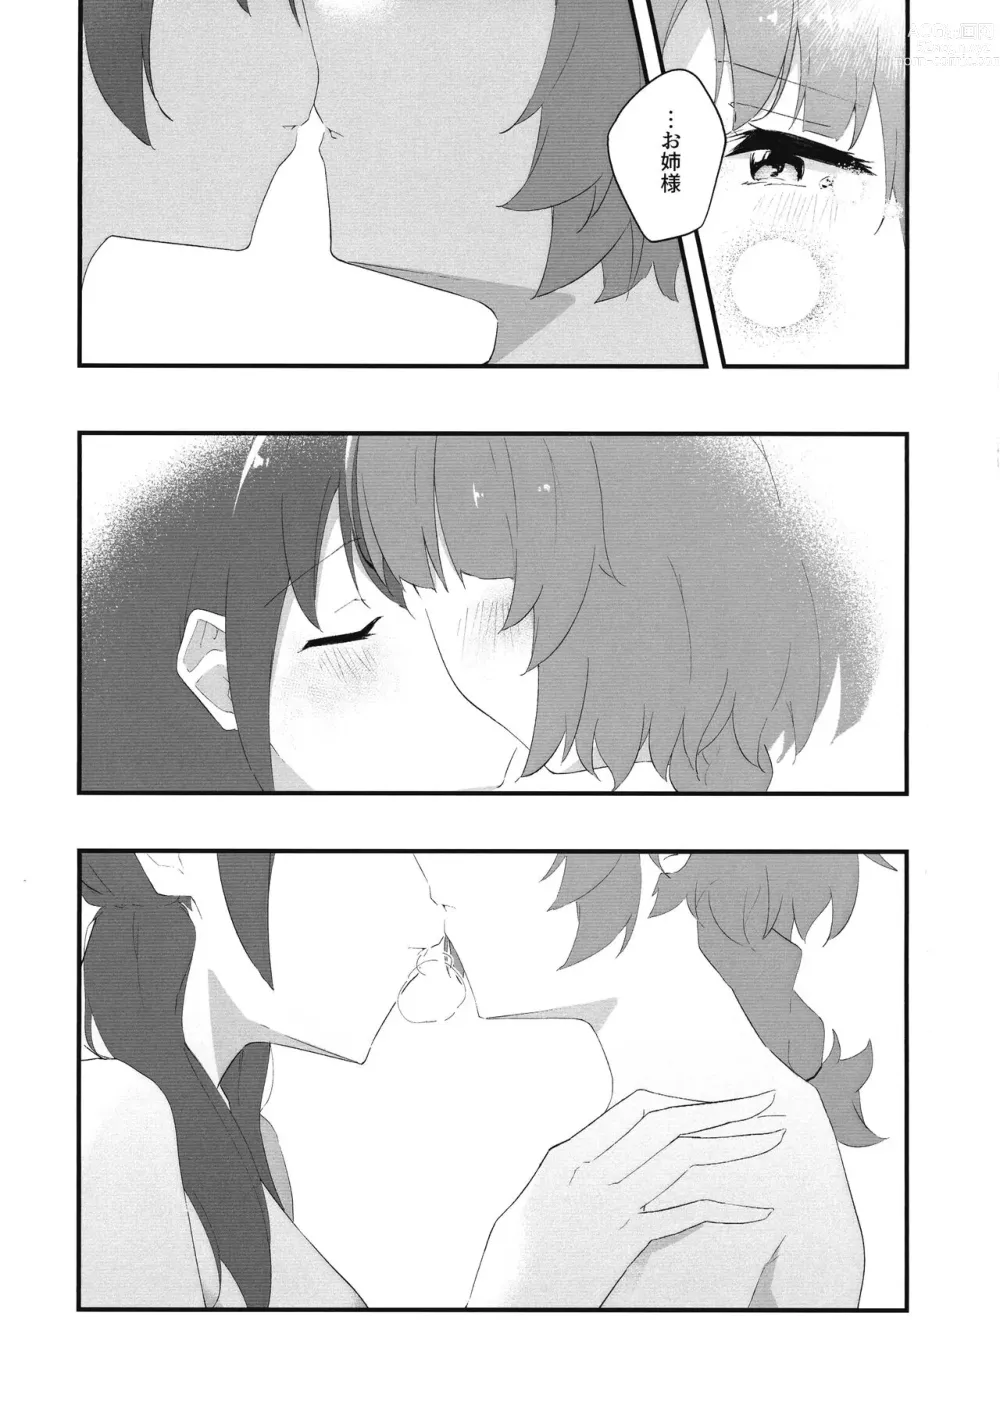 Page 14 of doujinshi Mabataki - without blink, could not find it